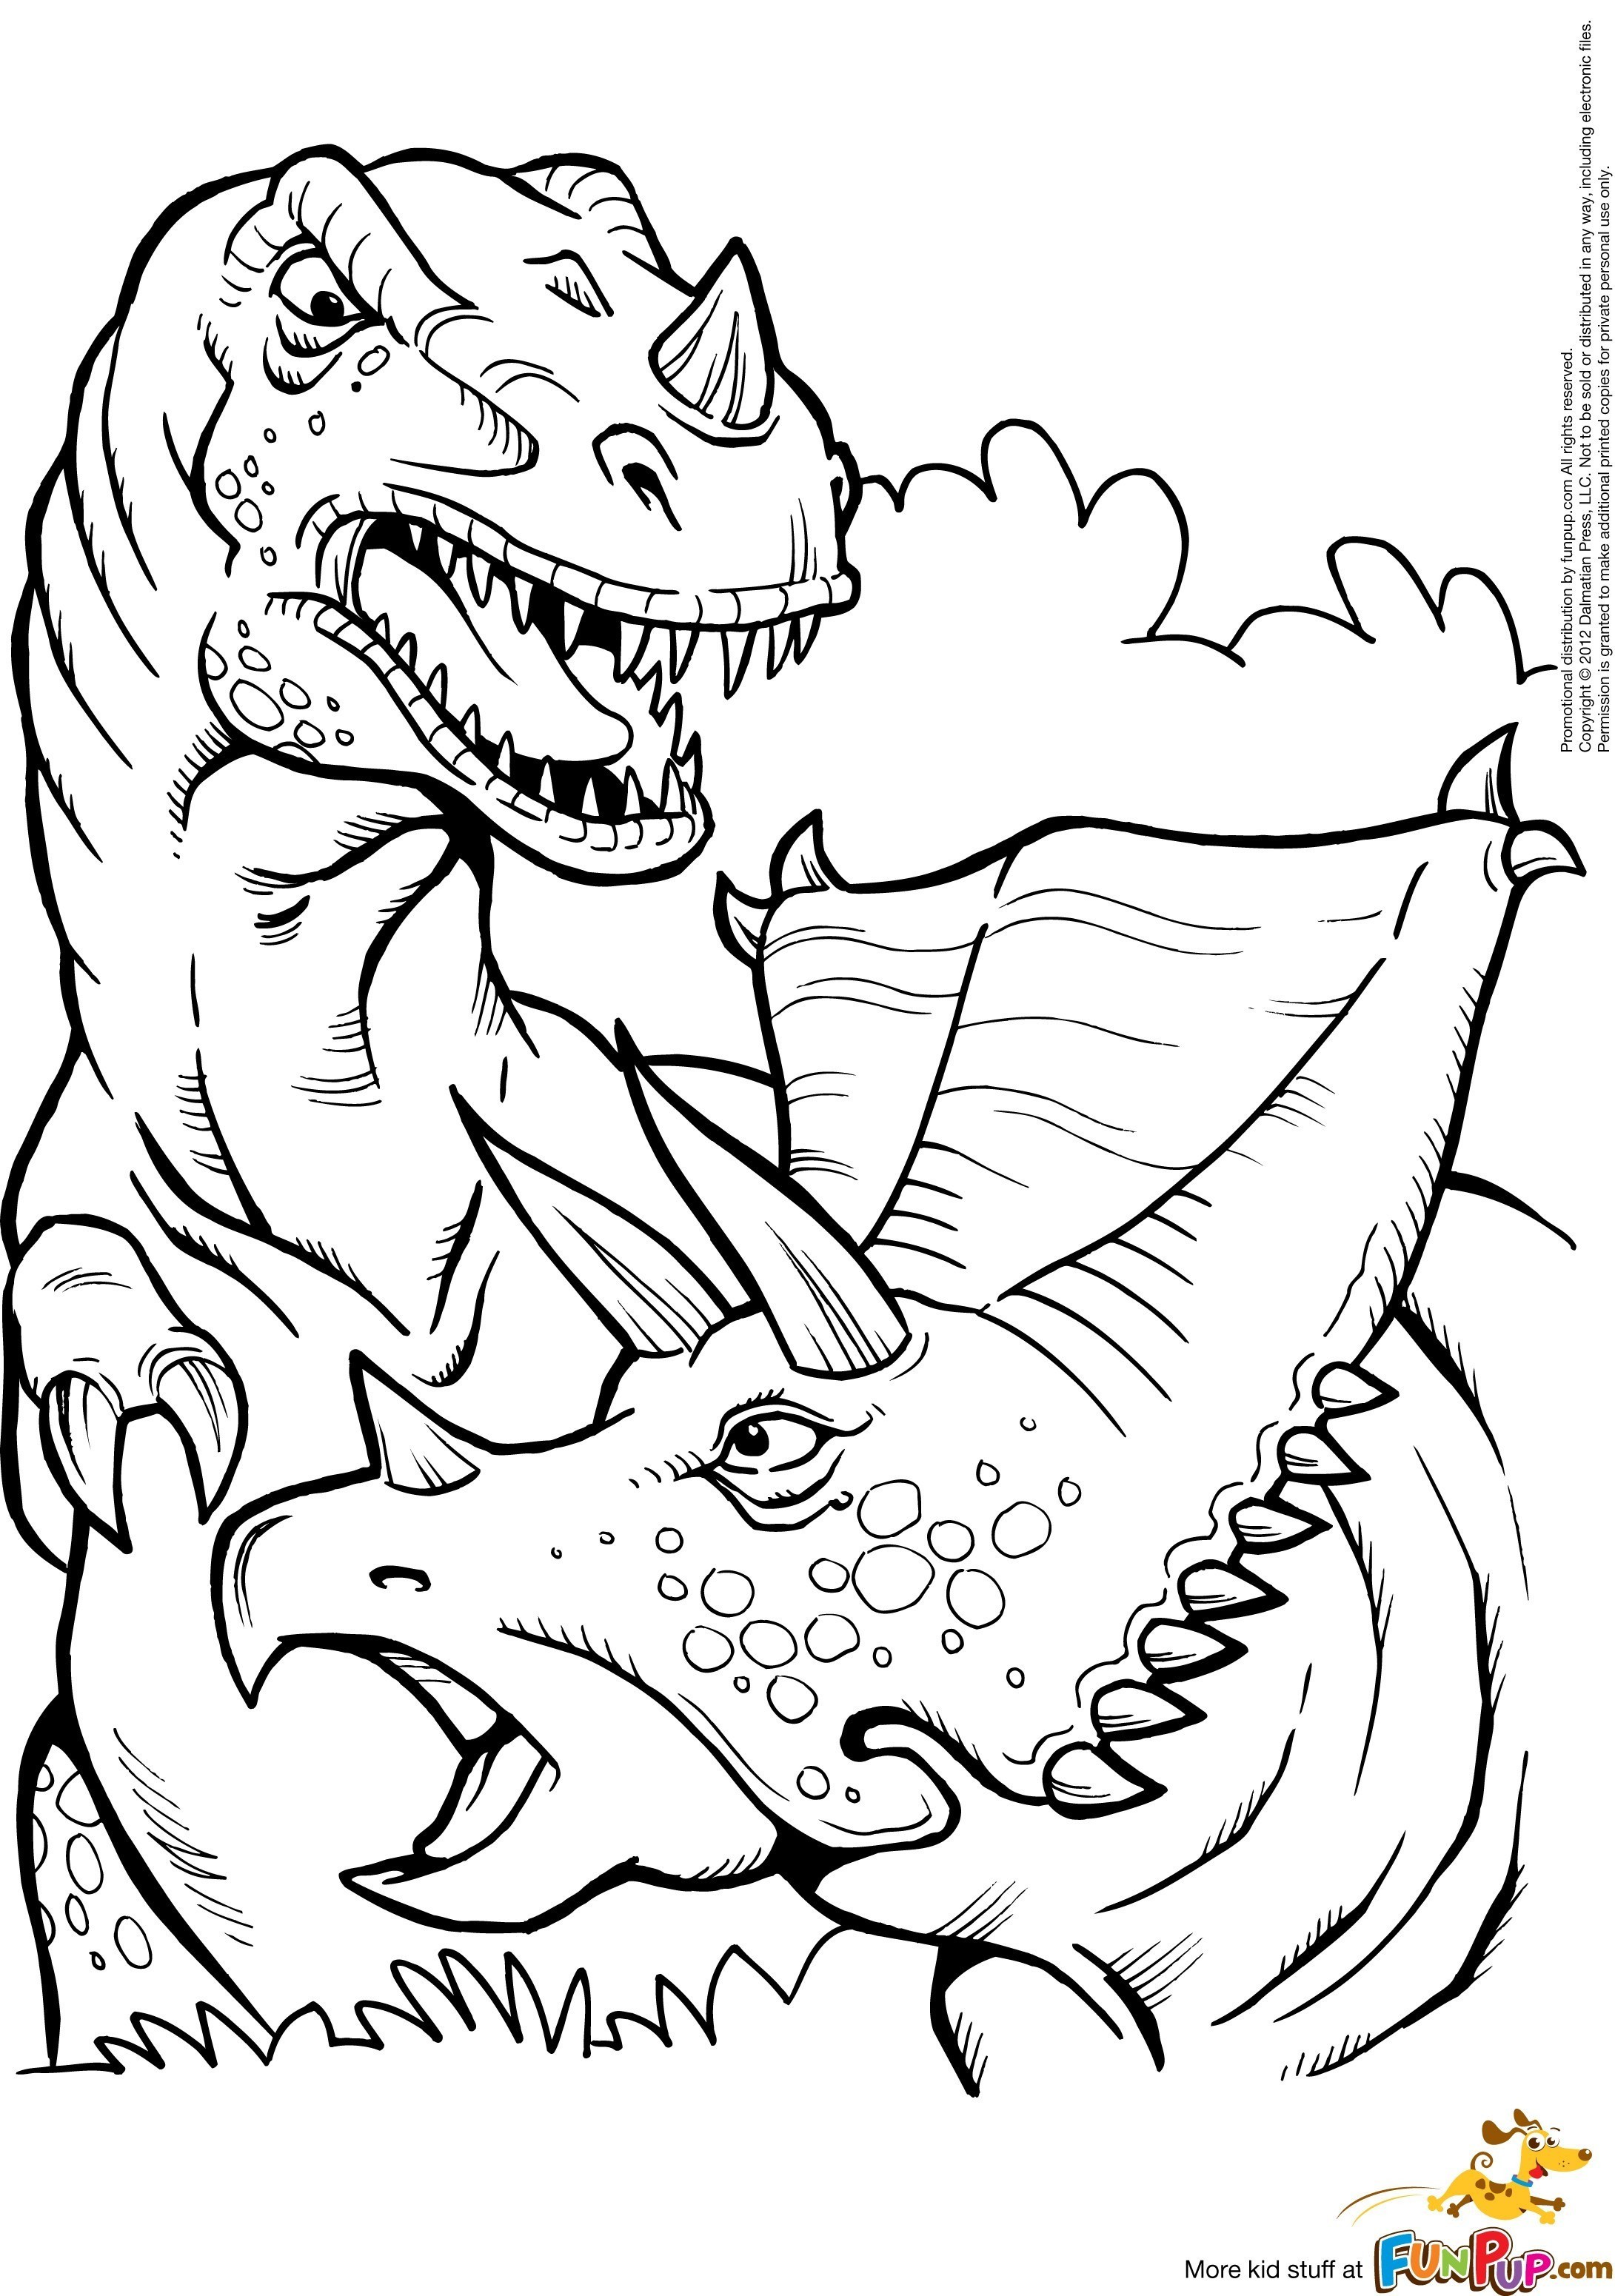 t-rex-pics-to-color-of-t-rex-pics-to-color T Rex Pics to Color Dinosaurs 